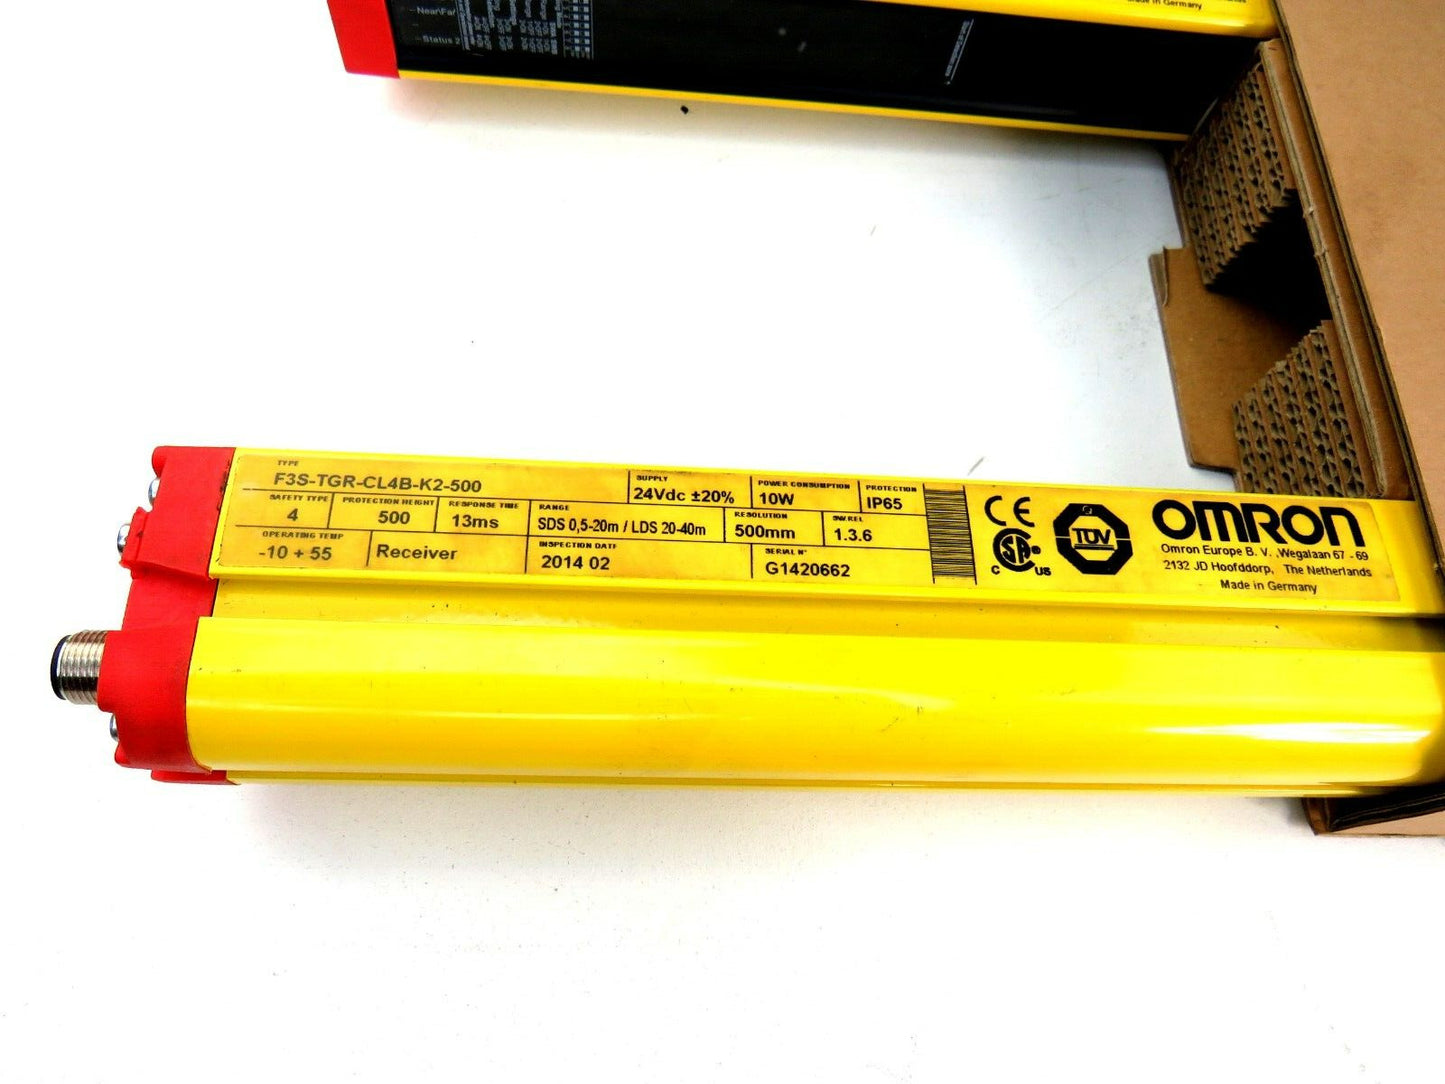 OMRON Safety Light Curtain, PL e, Level 4,2, 500 mm, 40m pair F3S-TGR-CL4-K2-500